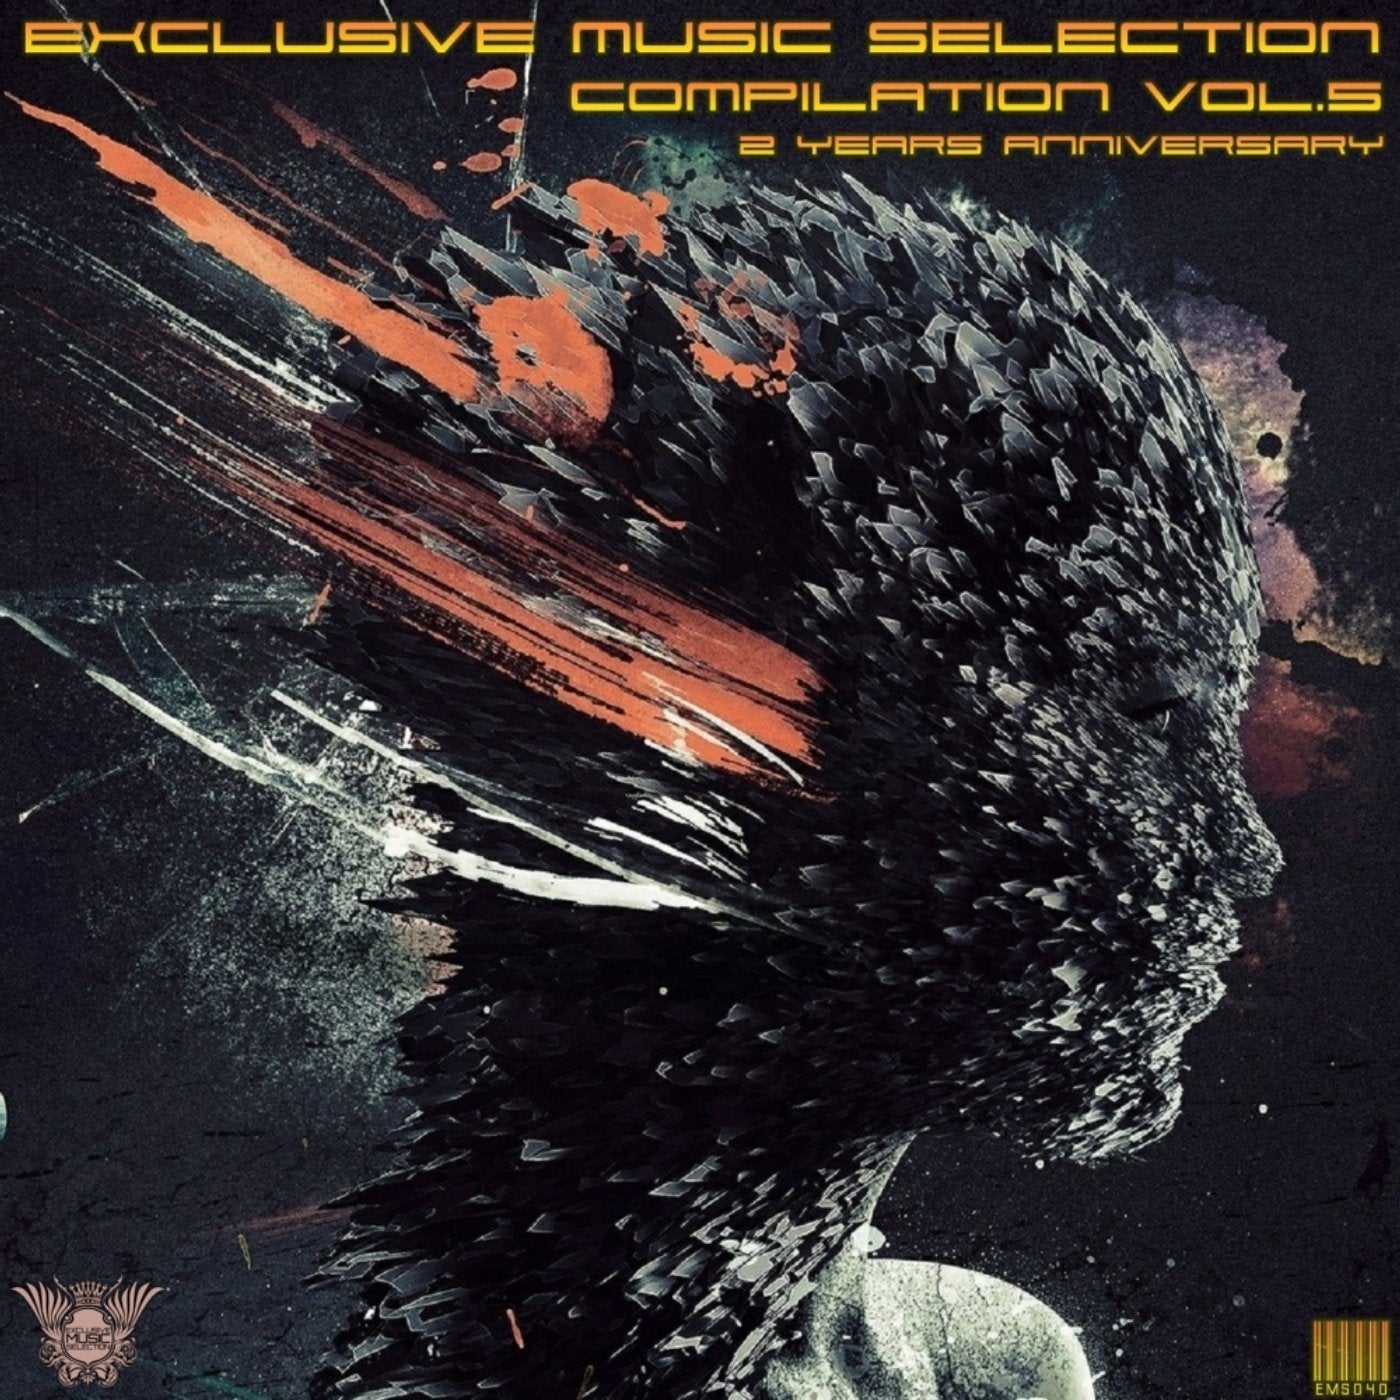 Exclusive Music Selection: Compilation, Vol. 5 2 Years Anniversary